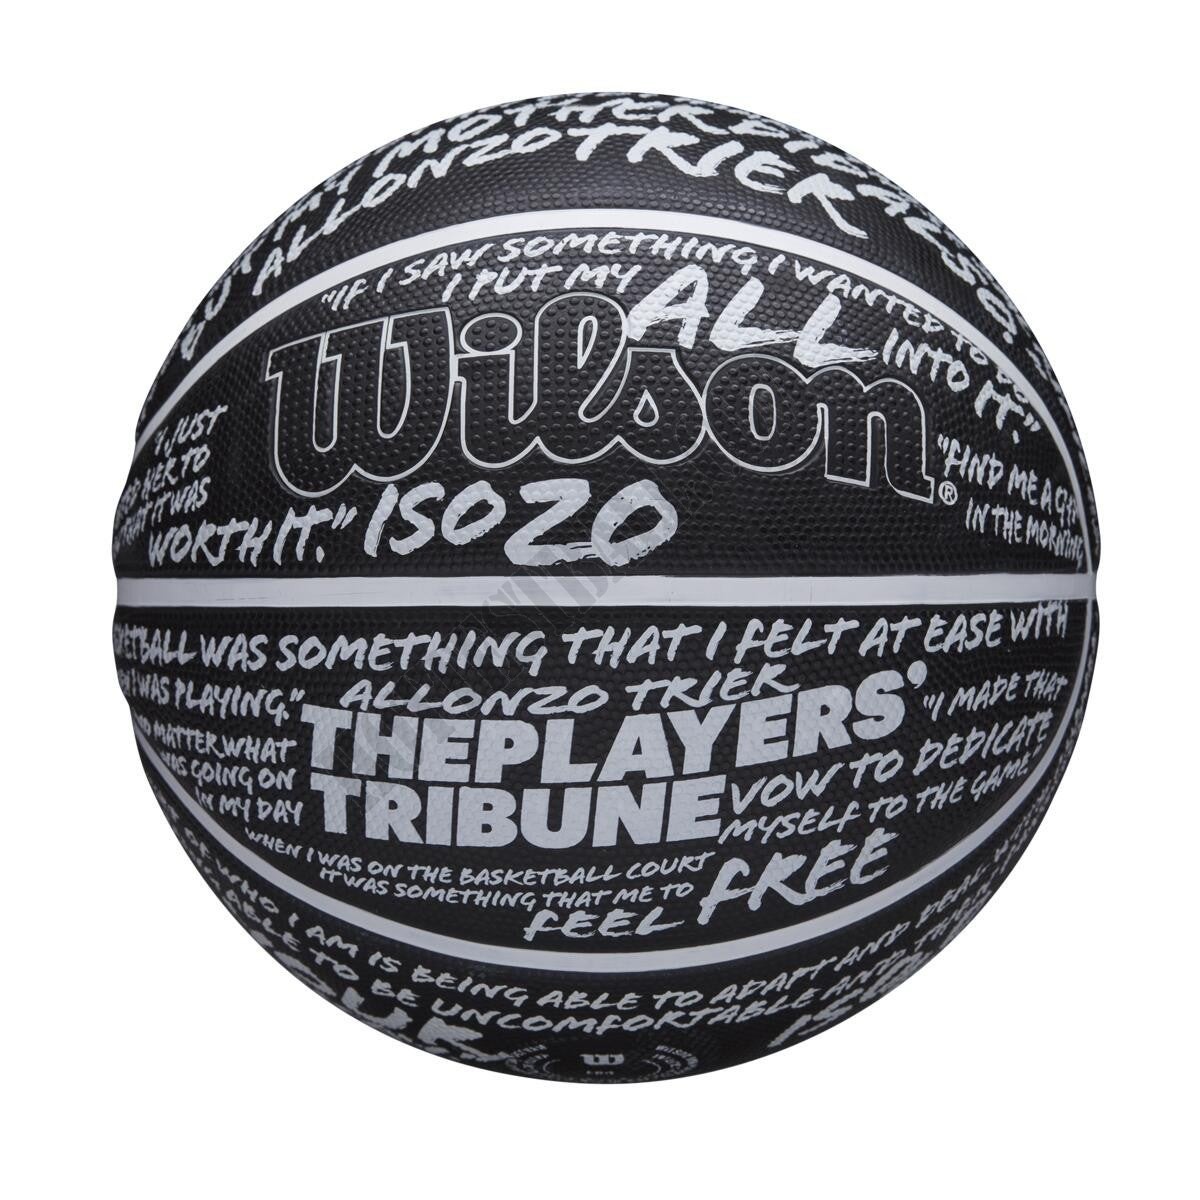 ISO Zo x The Players' Tribune Limited Edition Basketball - Wilson Discount Store - -9